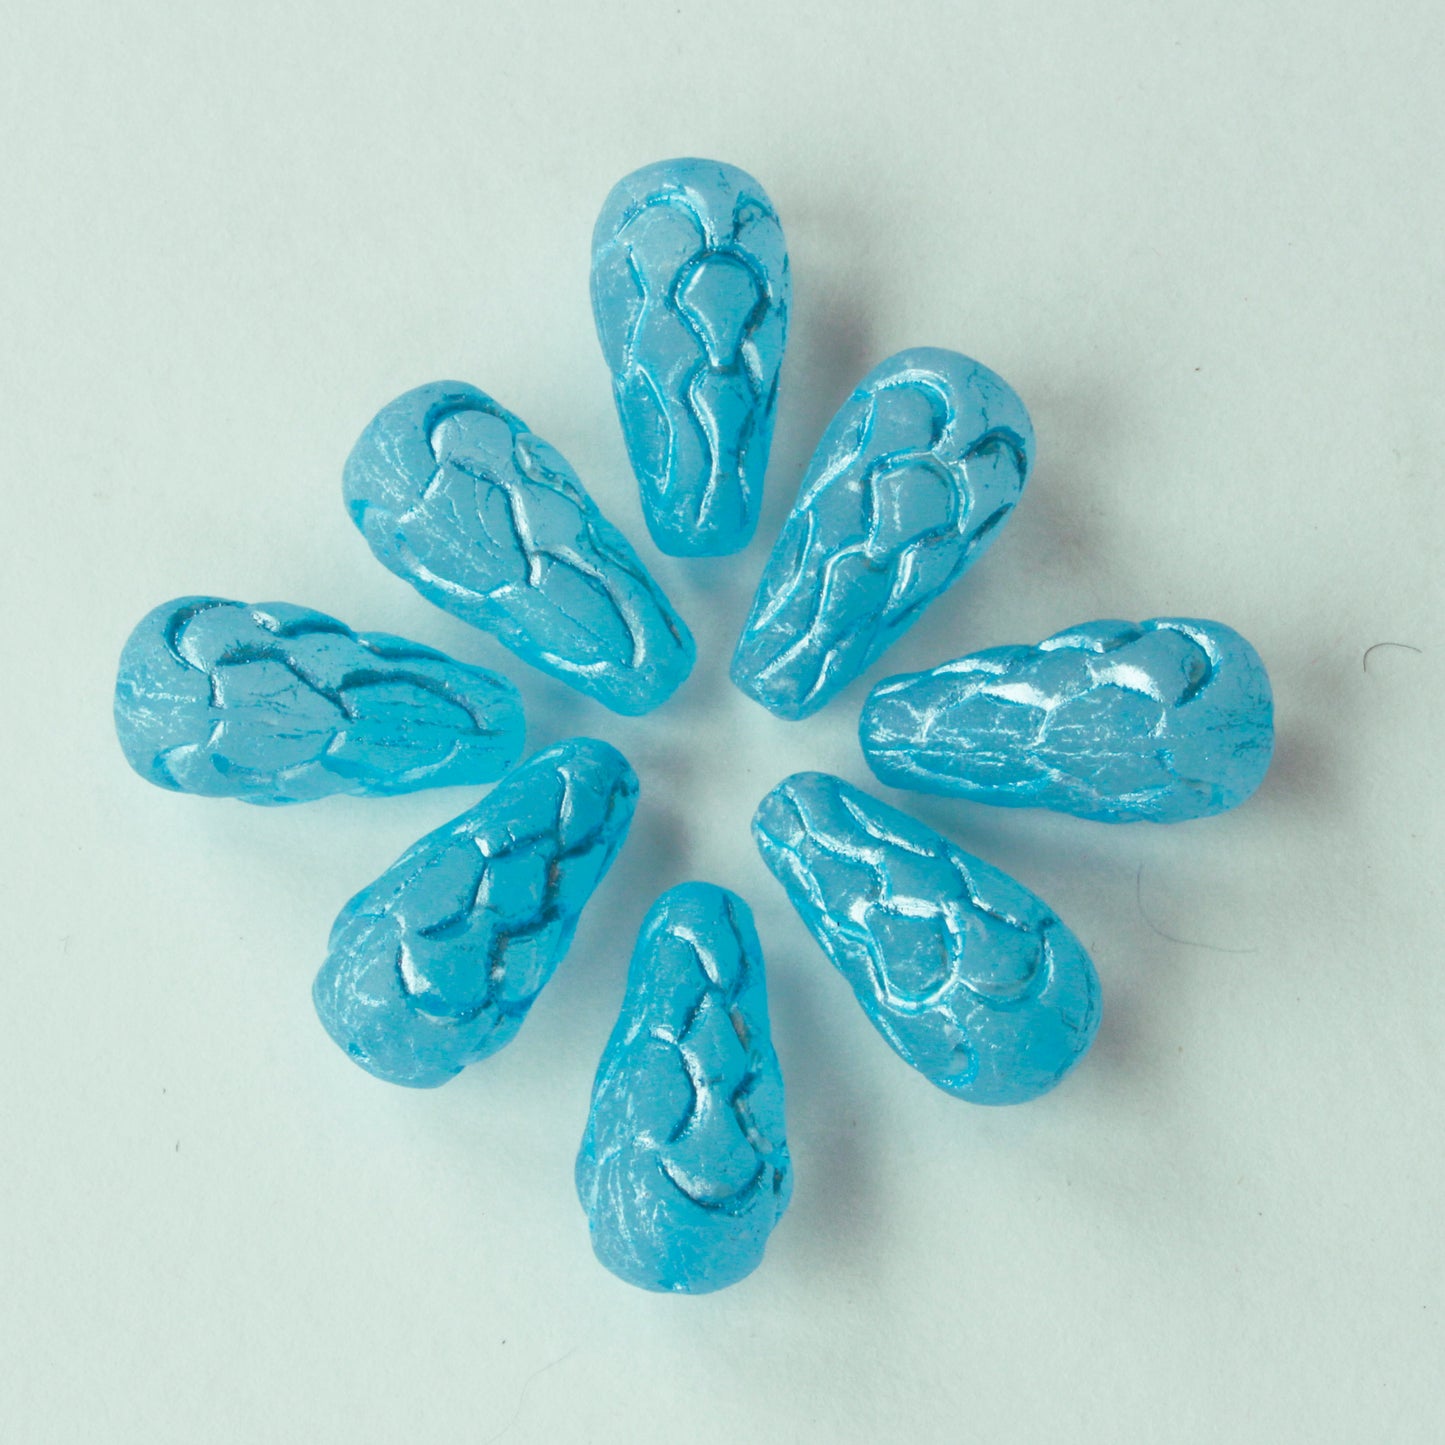 Load image into Gallery viewer, 25x12mm Long Drilled Designed Drops - Matte Aqua - 20 Beads
